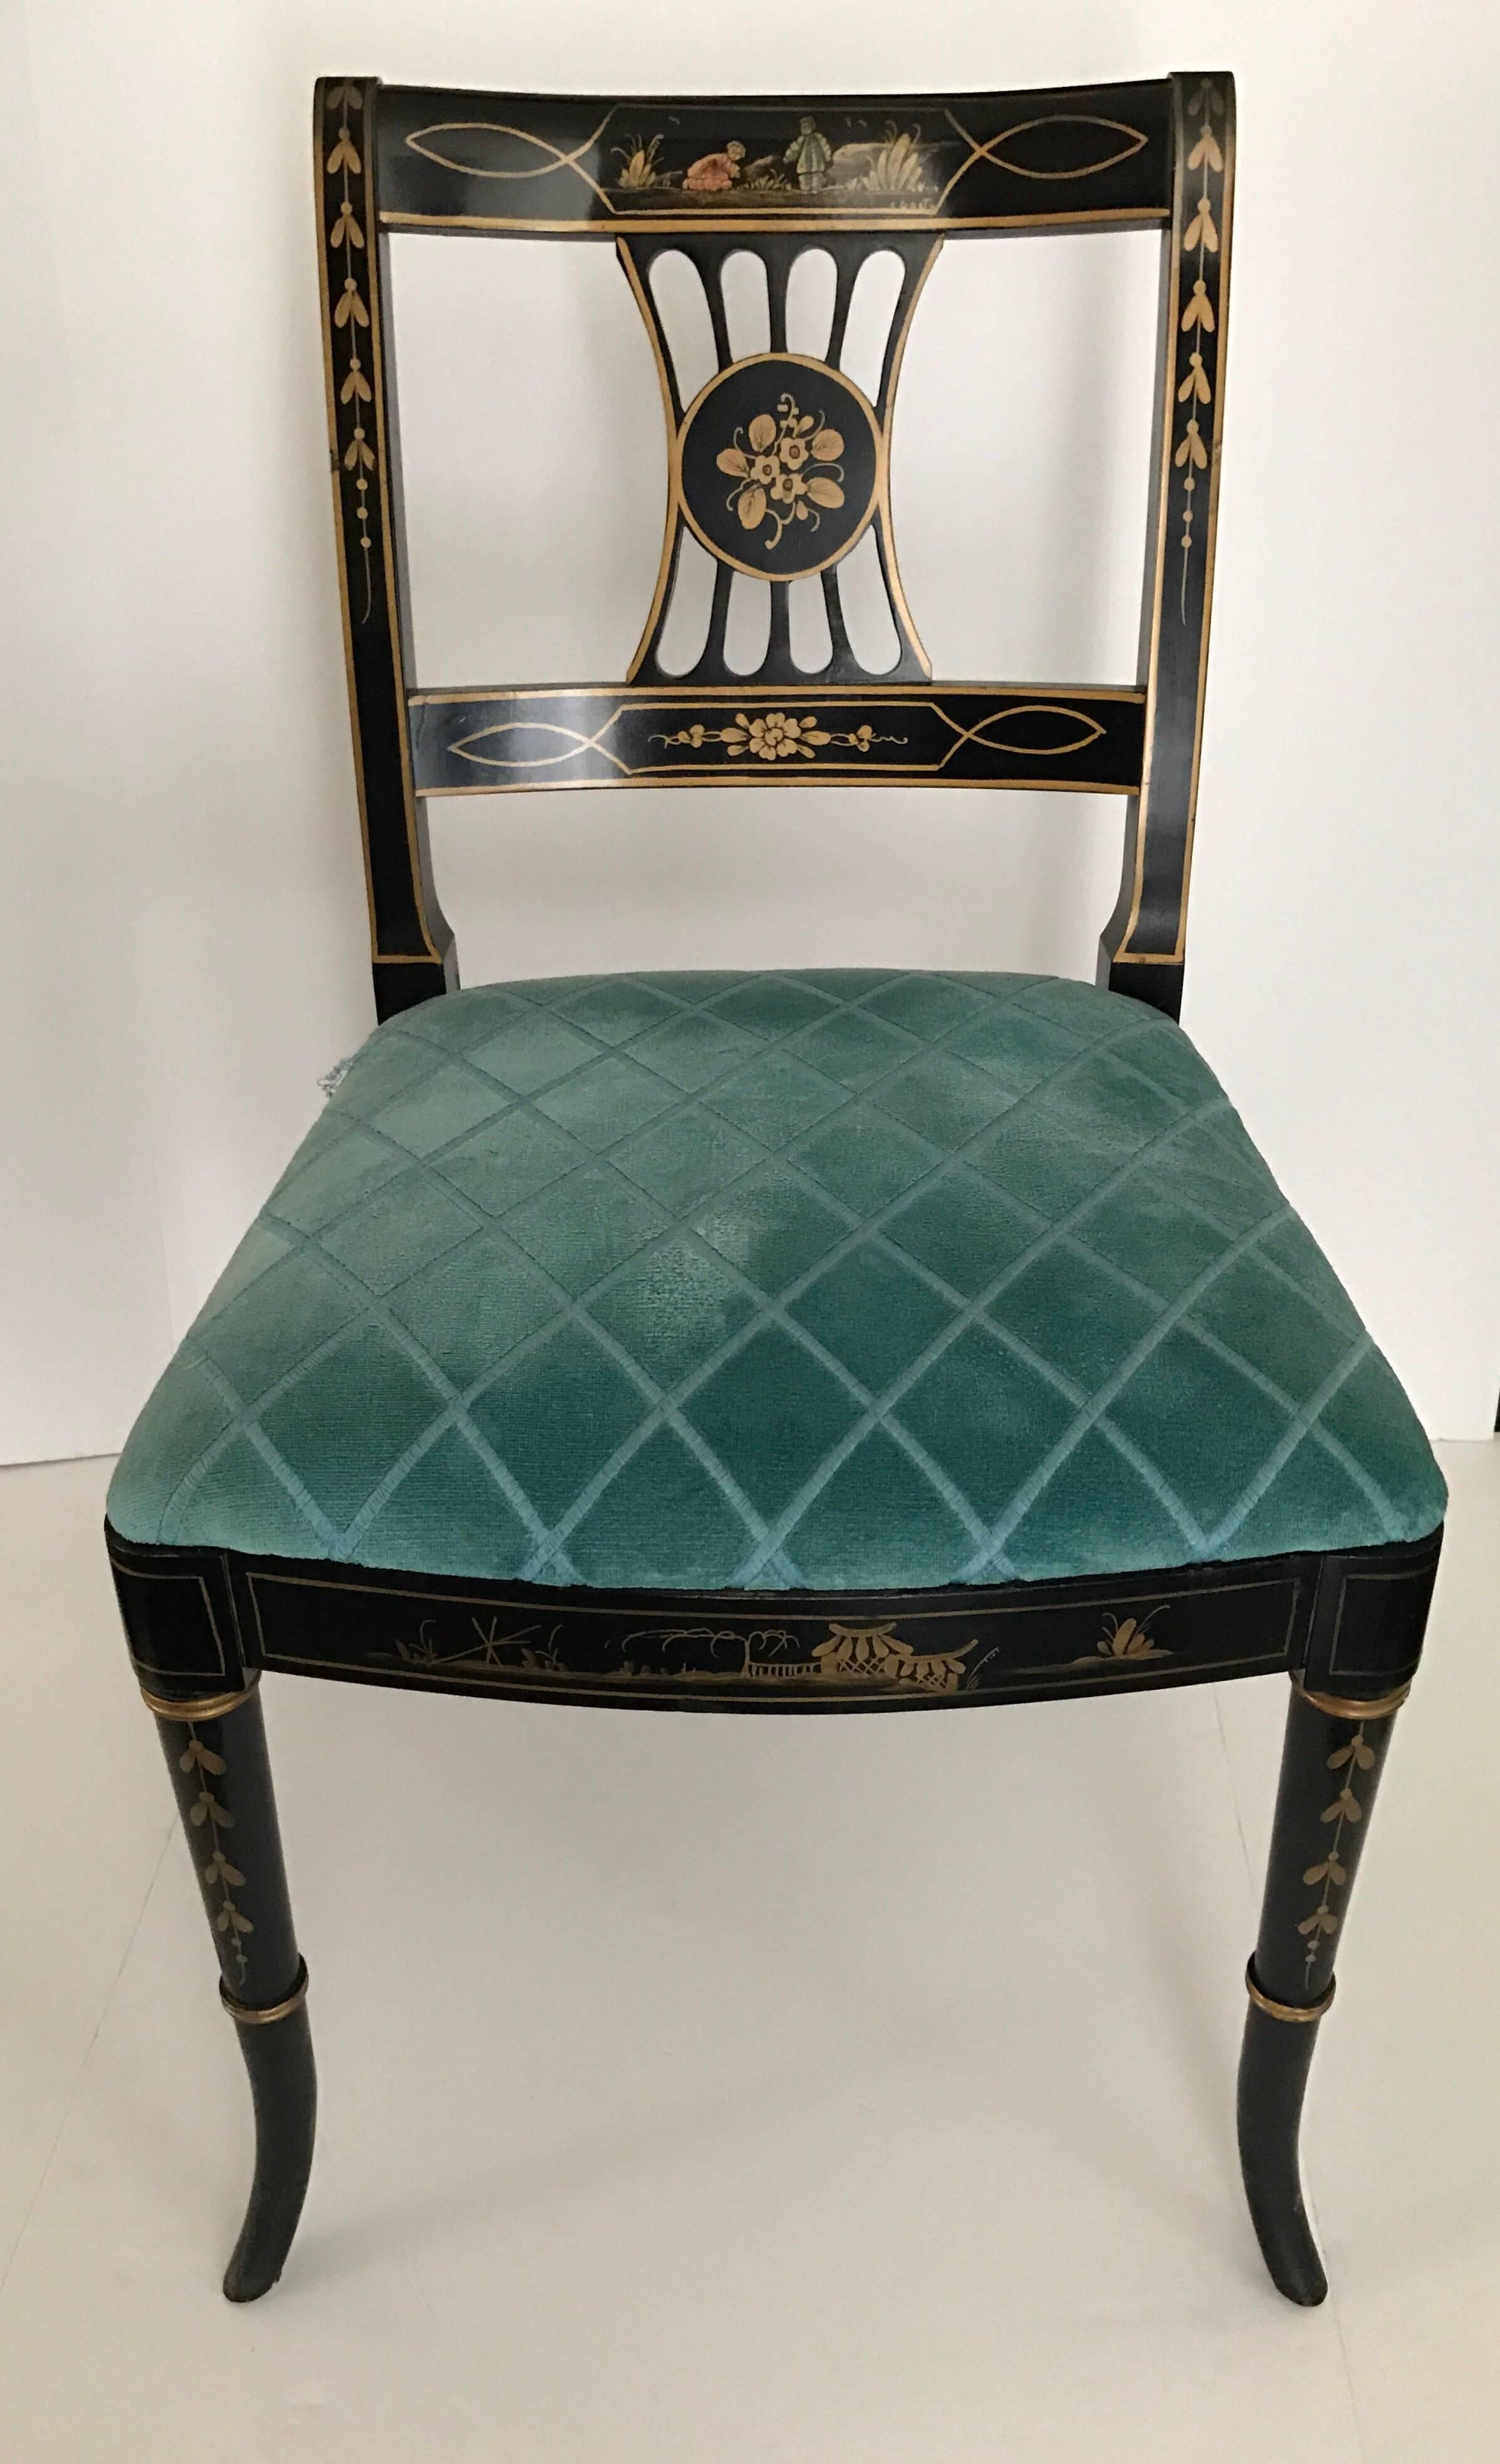 Elegant black laquered chinoiserie chairs with gilt painted scenery and detail. Set of six matching dining chairs include four side chairs and two armchairs.
Handmade by renowned cabinet maker Union National Jamestown, NY.
 